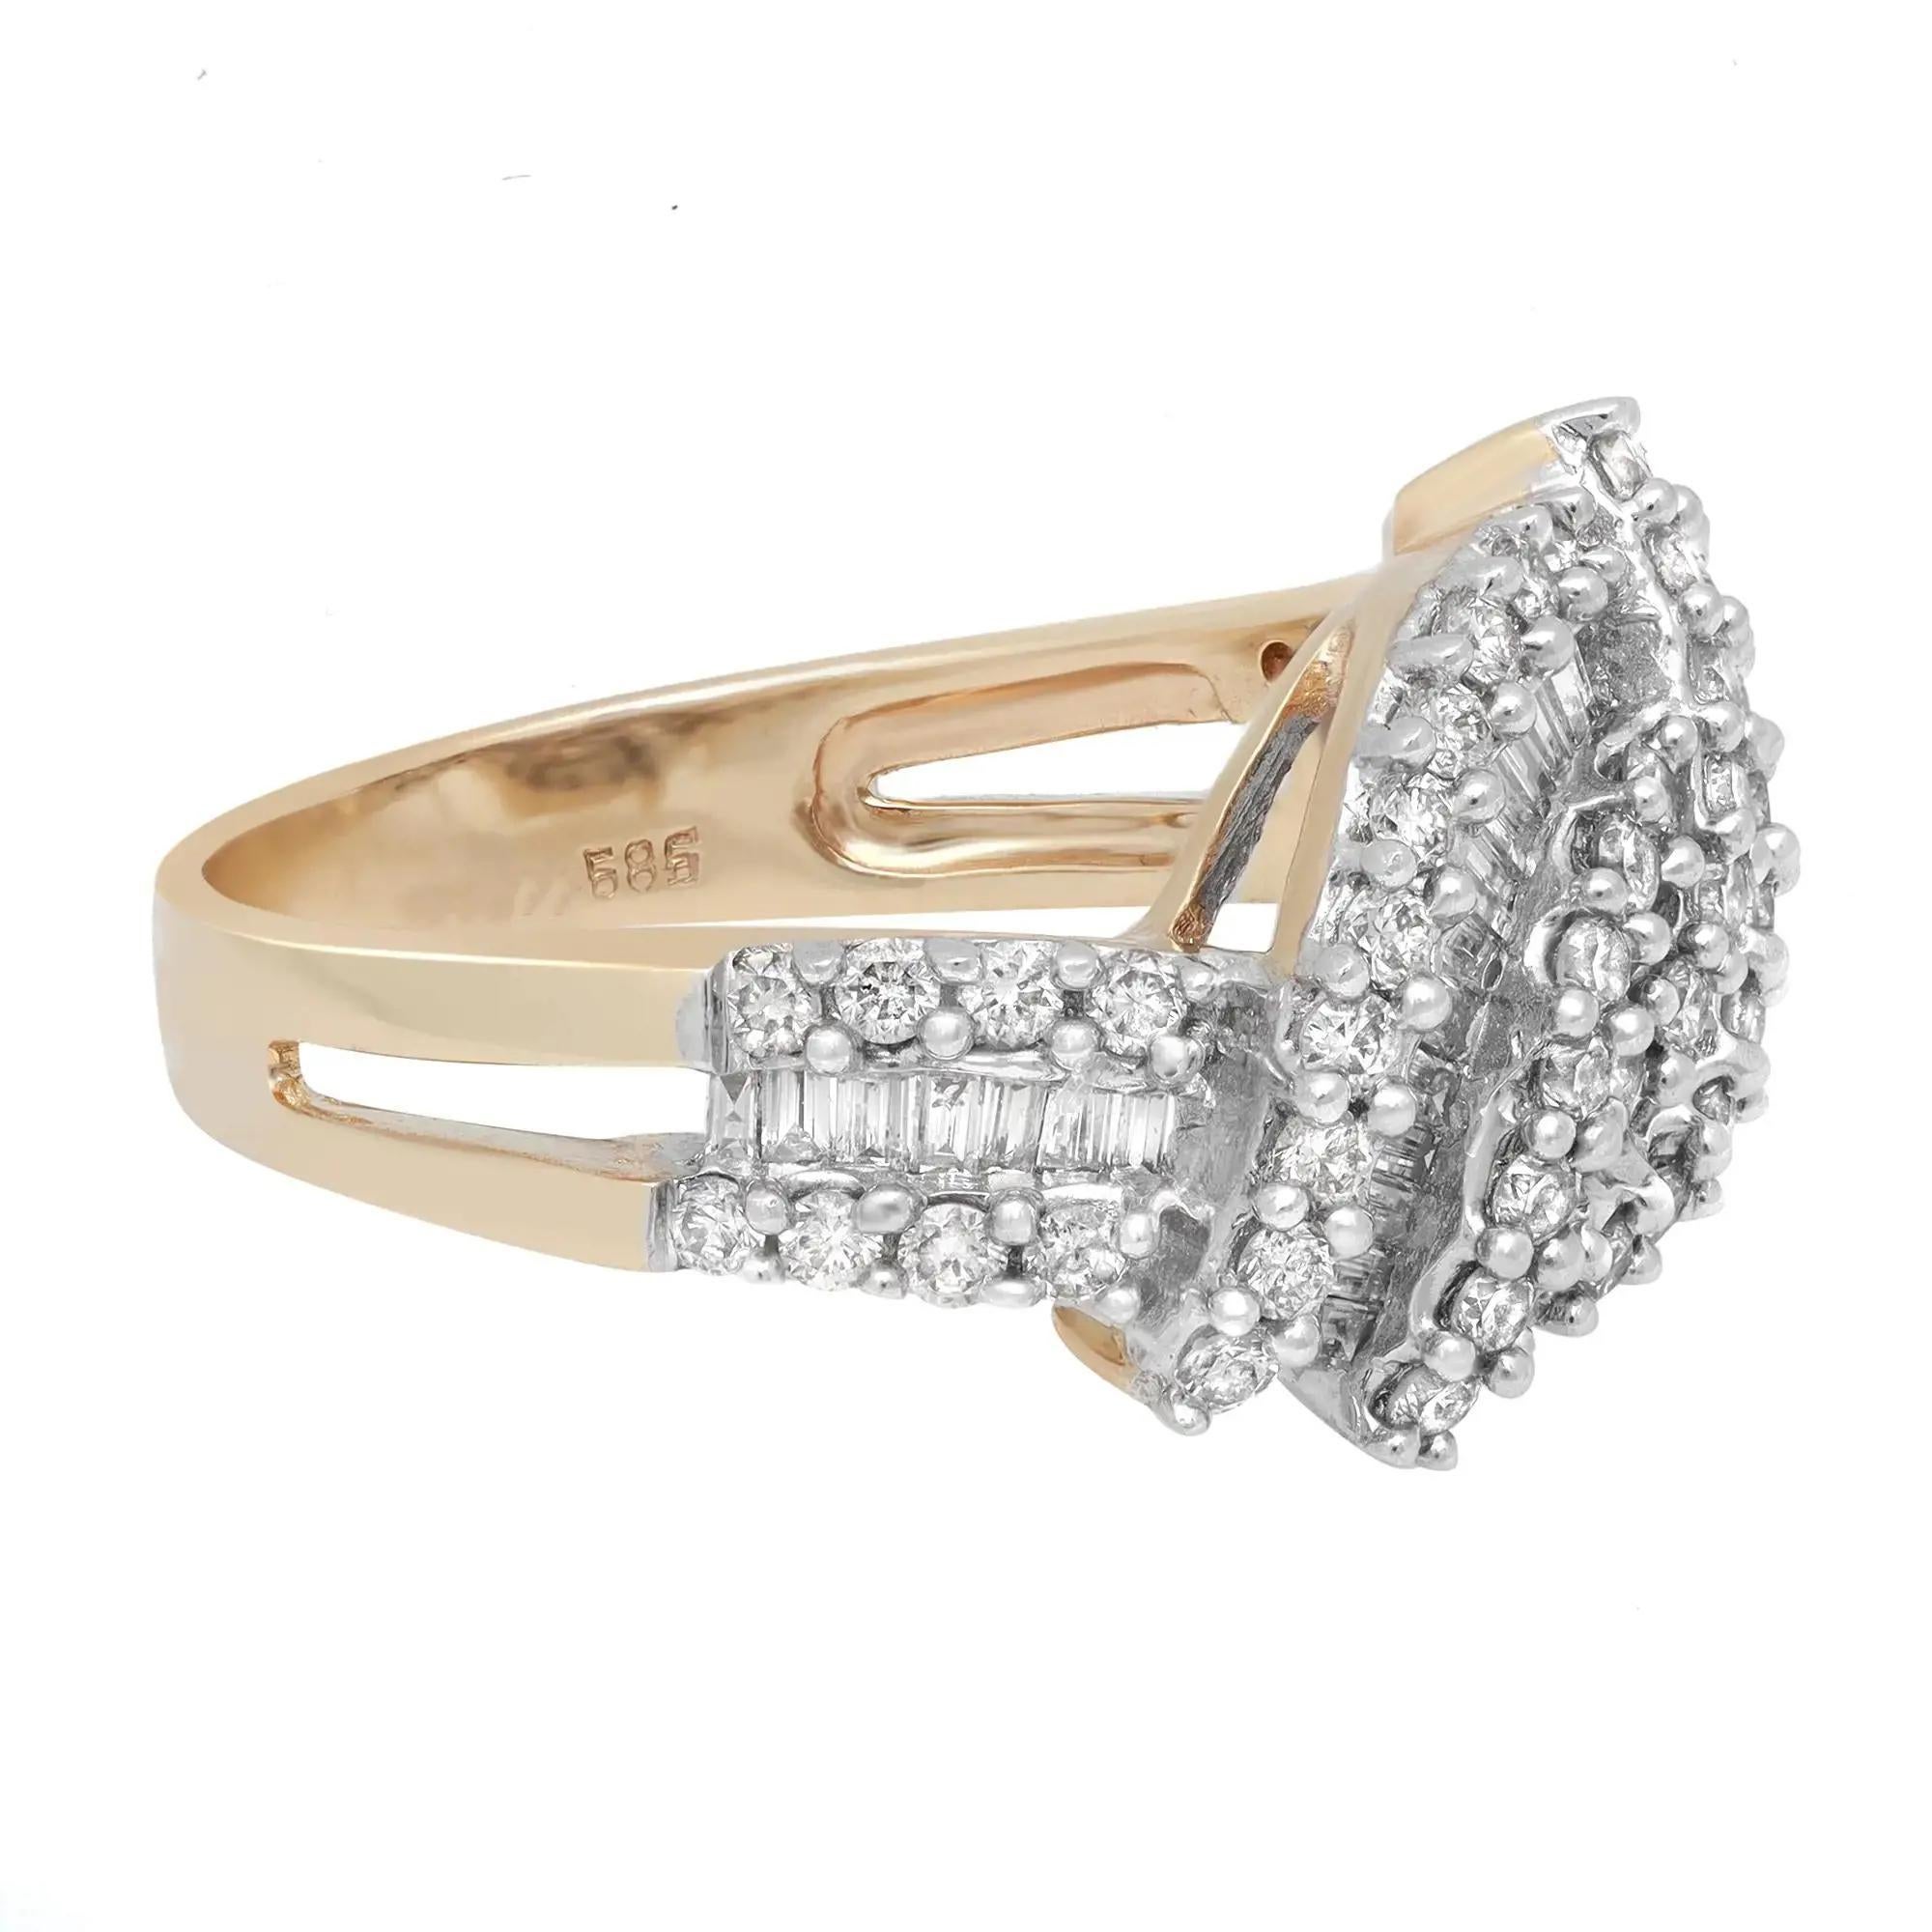 This beautiful diamond ladies cocktail ring exceptionally holds channel set baguette cut diamonds and prong set round brilliant cut diamonds in an elegant knot shape shank. Crafted in fine 14k yellow gold. Total diamond weight: 1.36 carats. Diamond